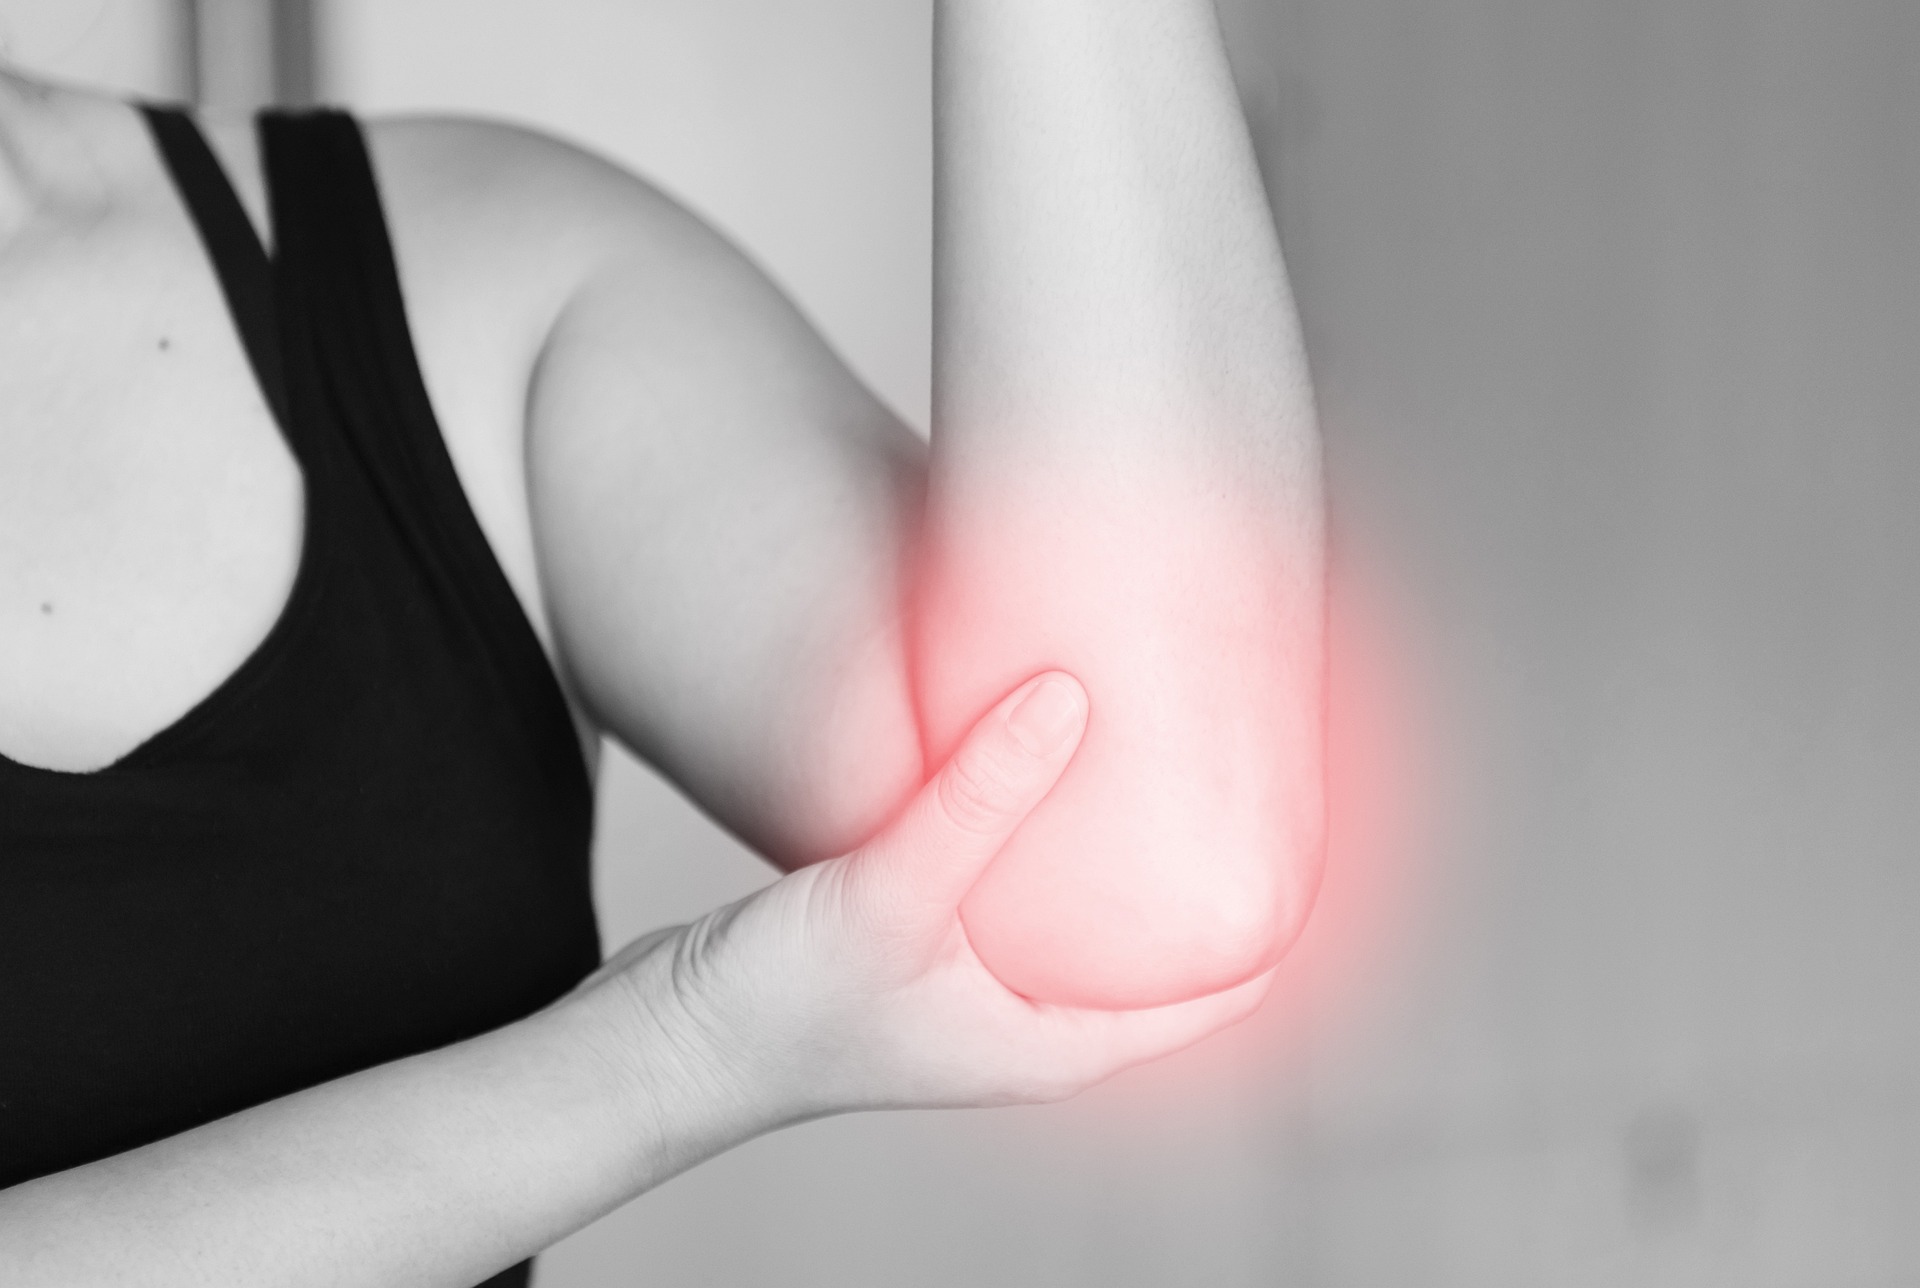 Grayscale photo of a person with injured elbow. The elbow looks like it has a faint red glow.